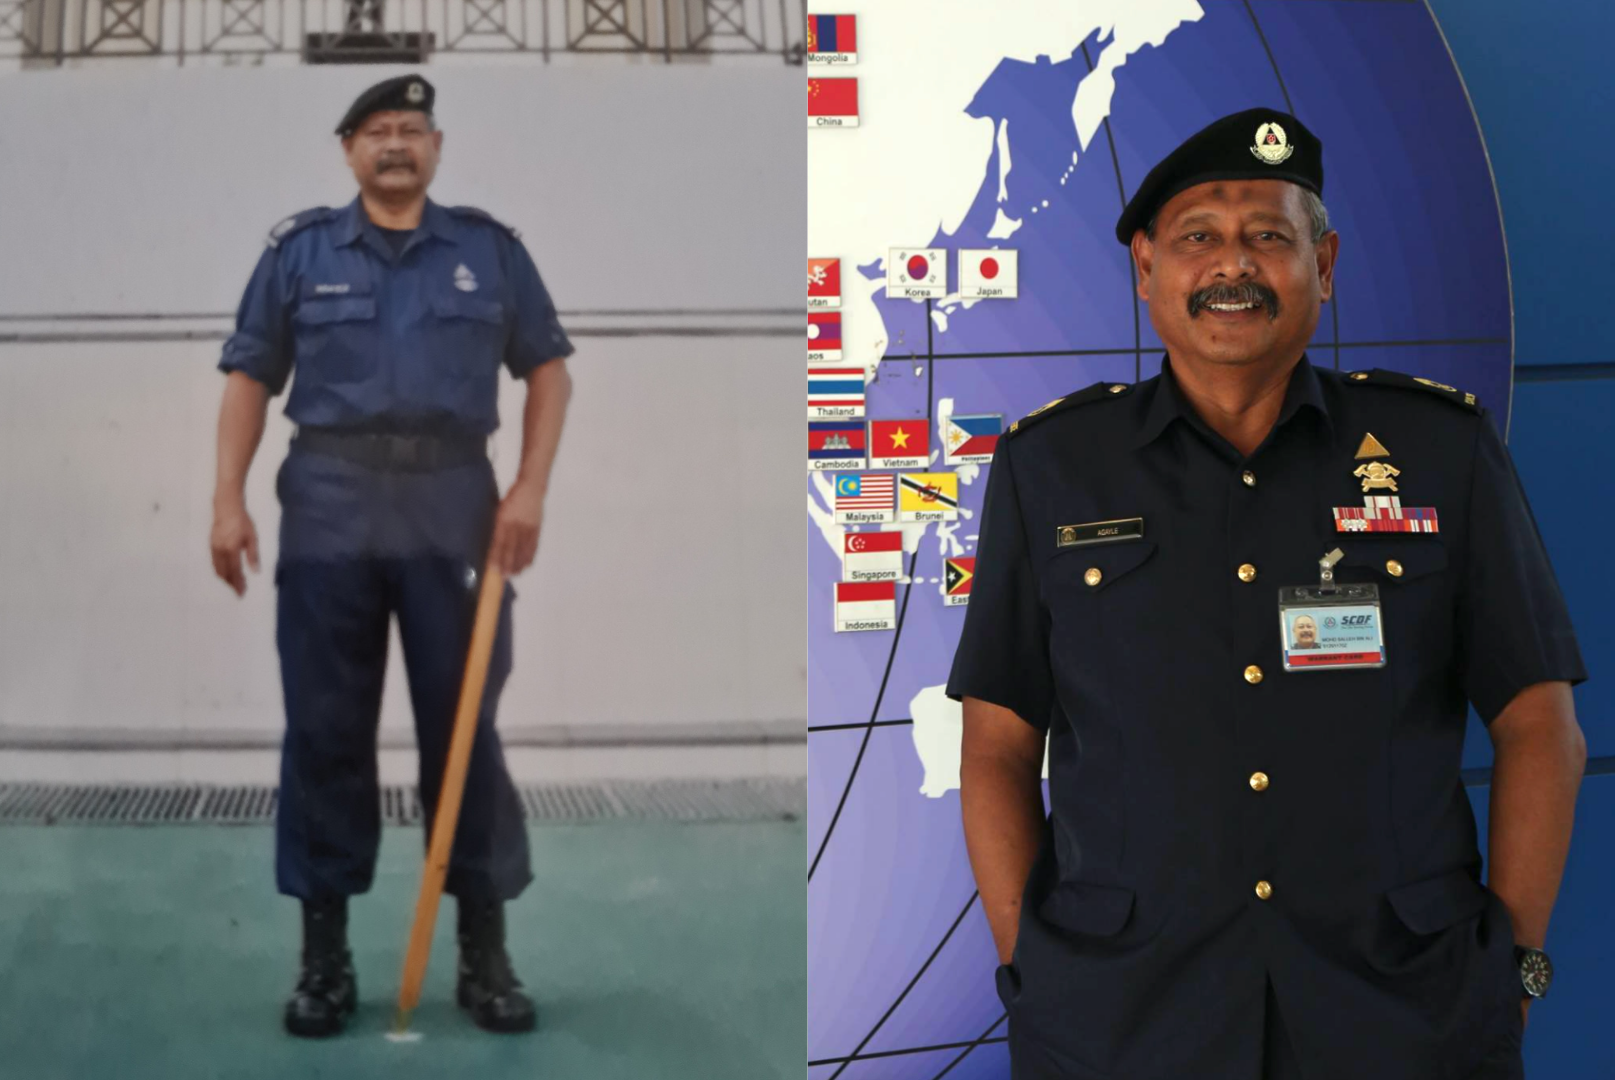 SWO (RET) Md Salleh had been a senior trainer at the Civil Defence Academy since its establishment in 1999 until his recent retirement this year.